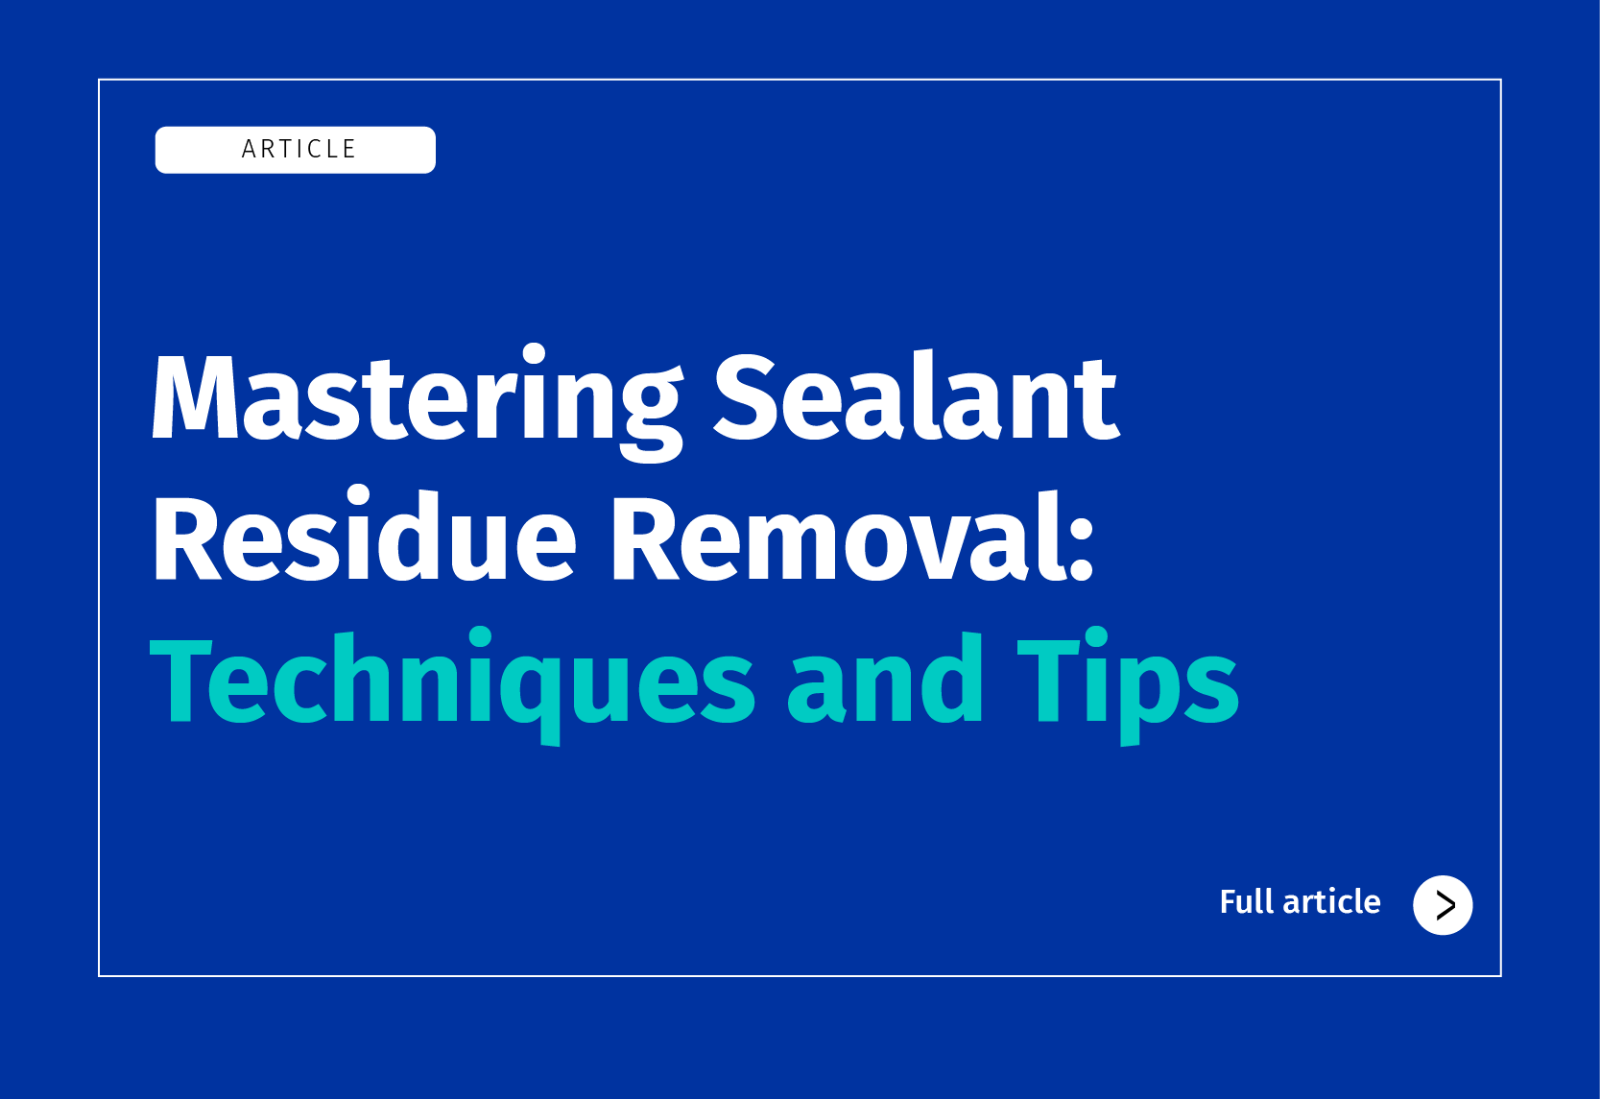 Mastering Sealant Residue Removal: Techniques and Tips